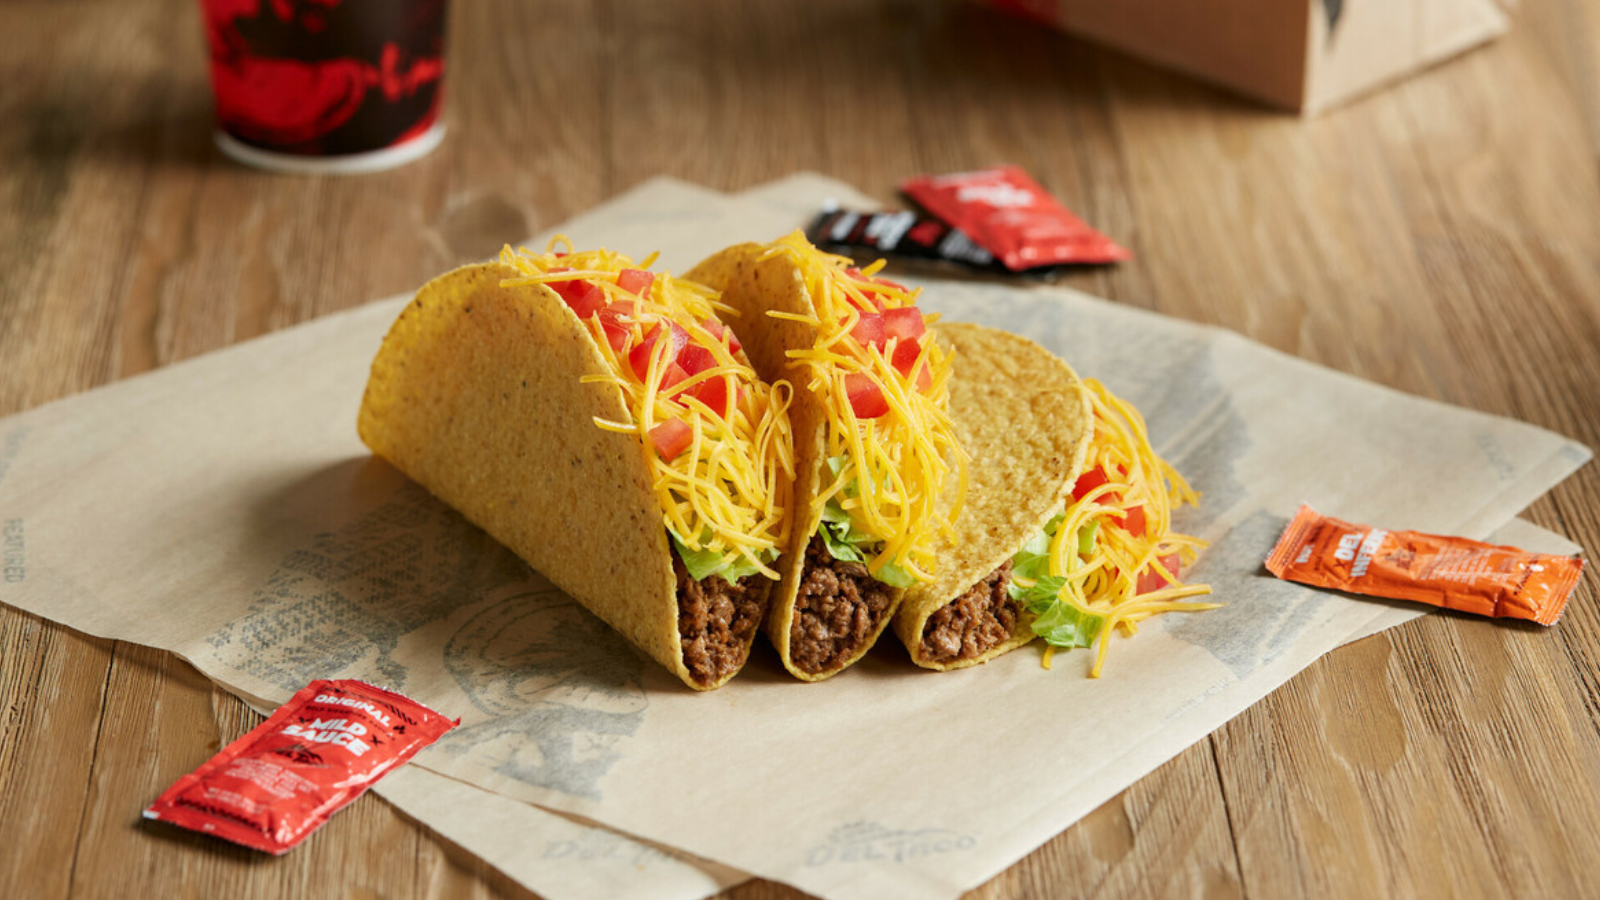 Best Taco Franchises to Own